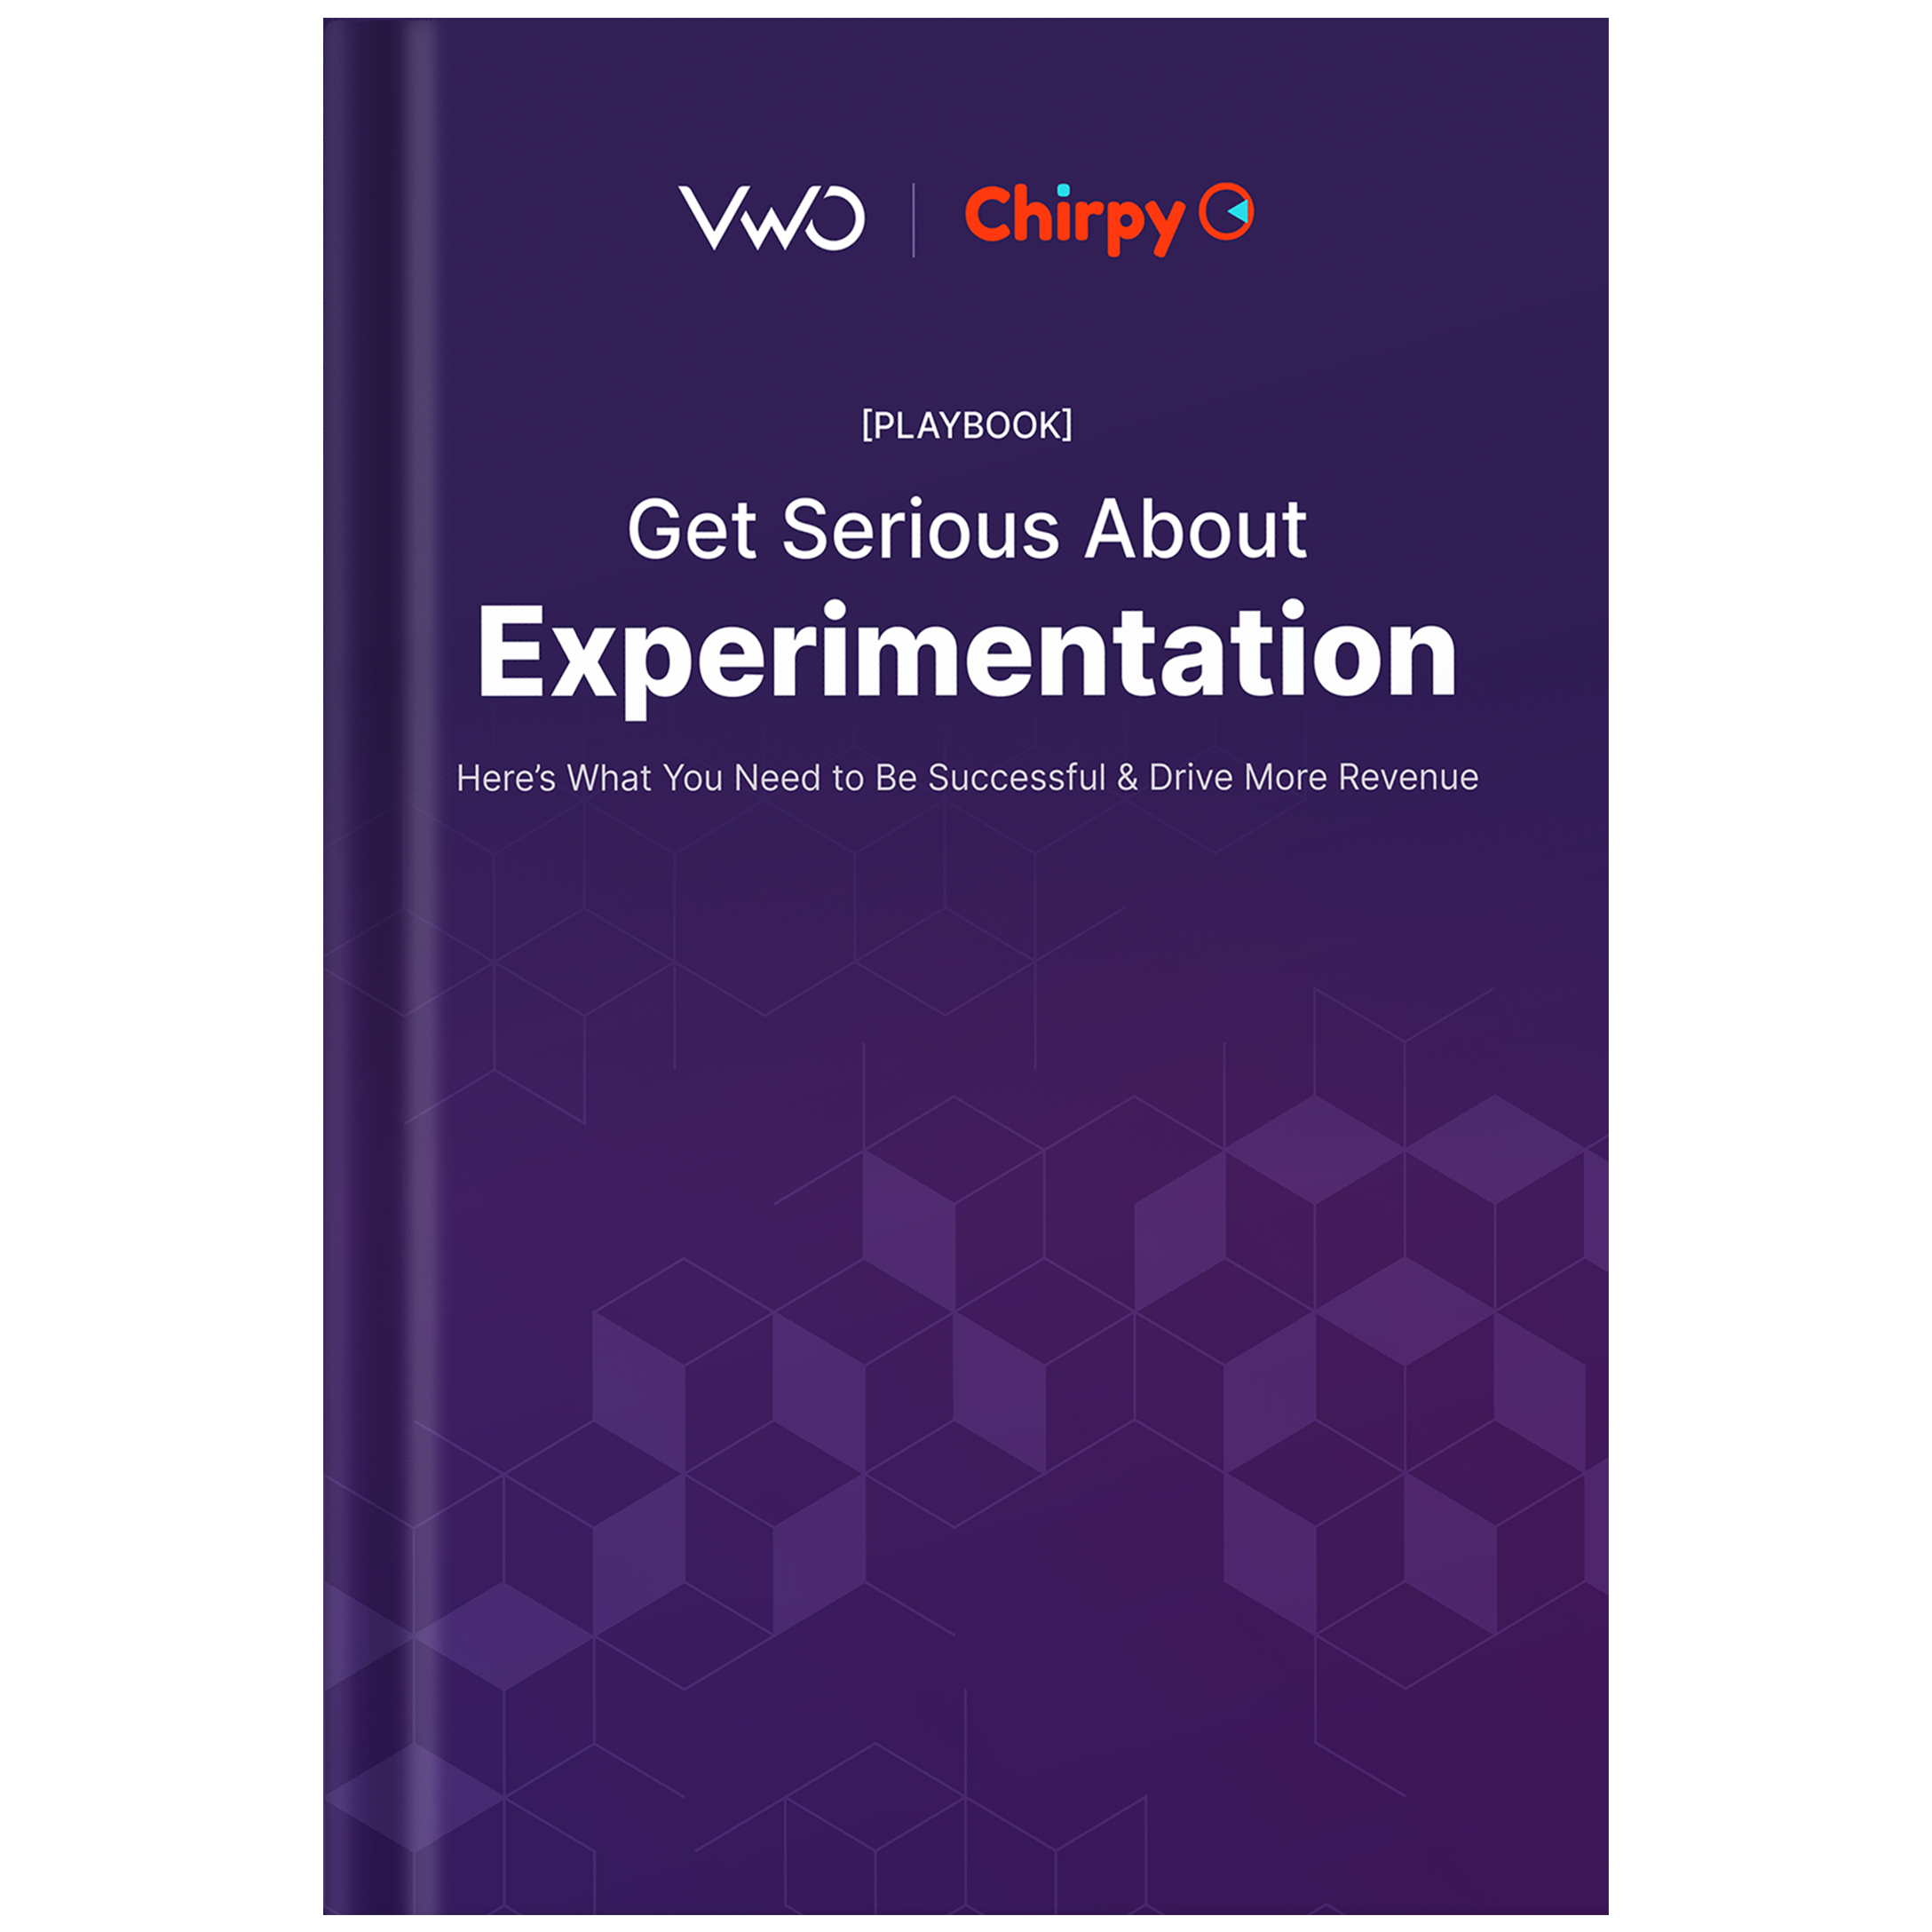 Get Serious About Experimentation